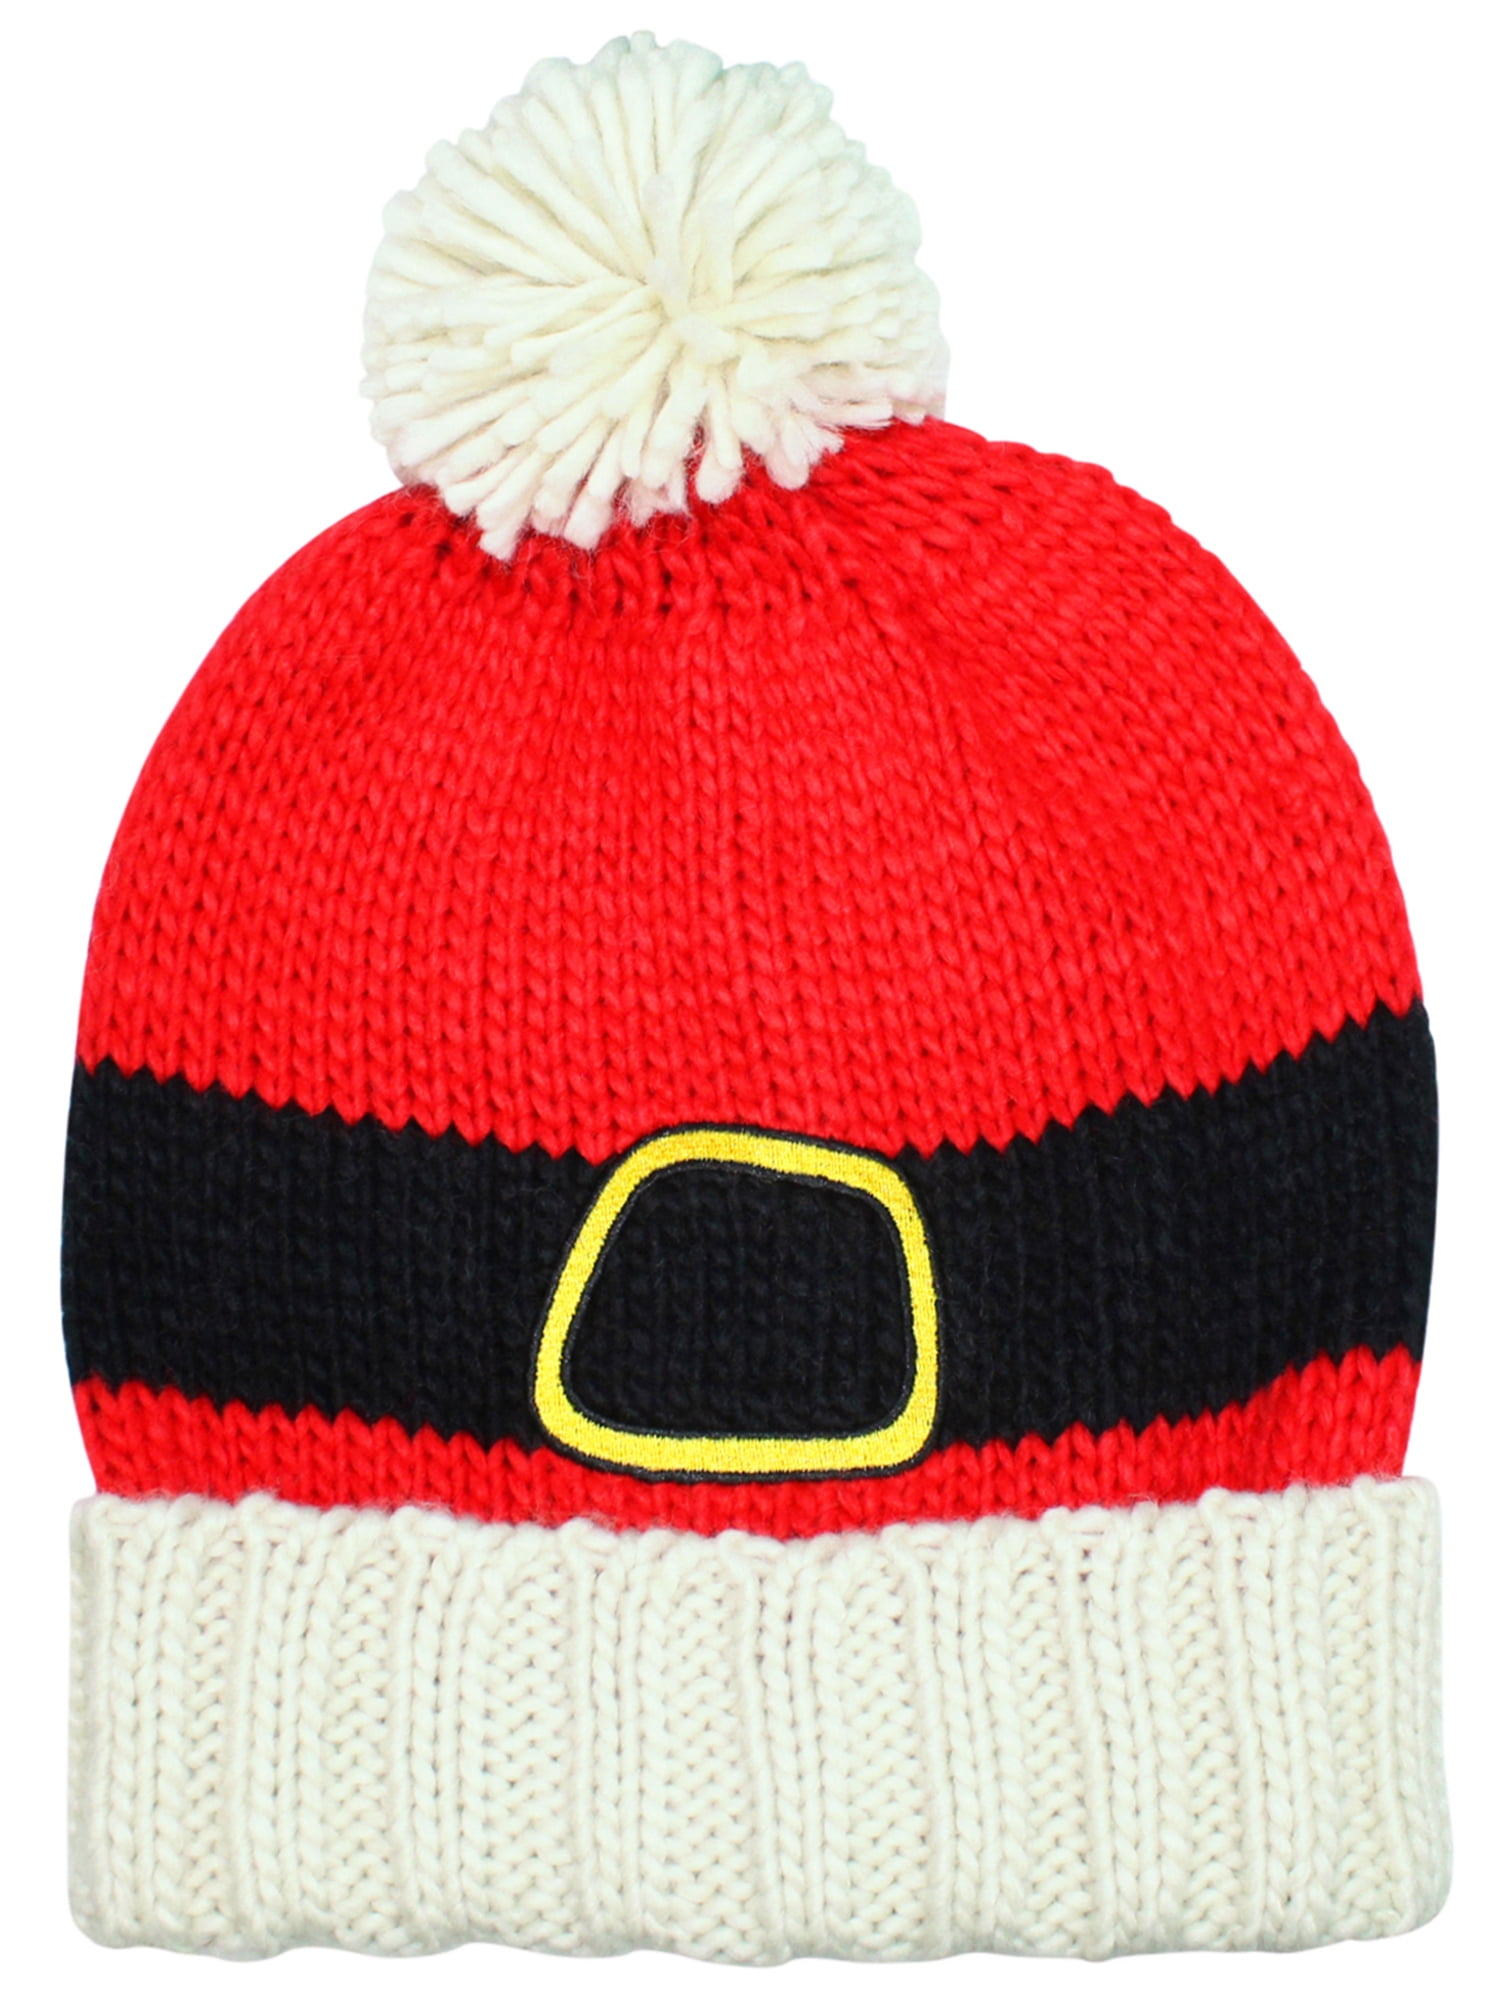 Dr. Seuss The Grinch Who Stole Christmas Pom Beanie Hat